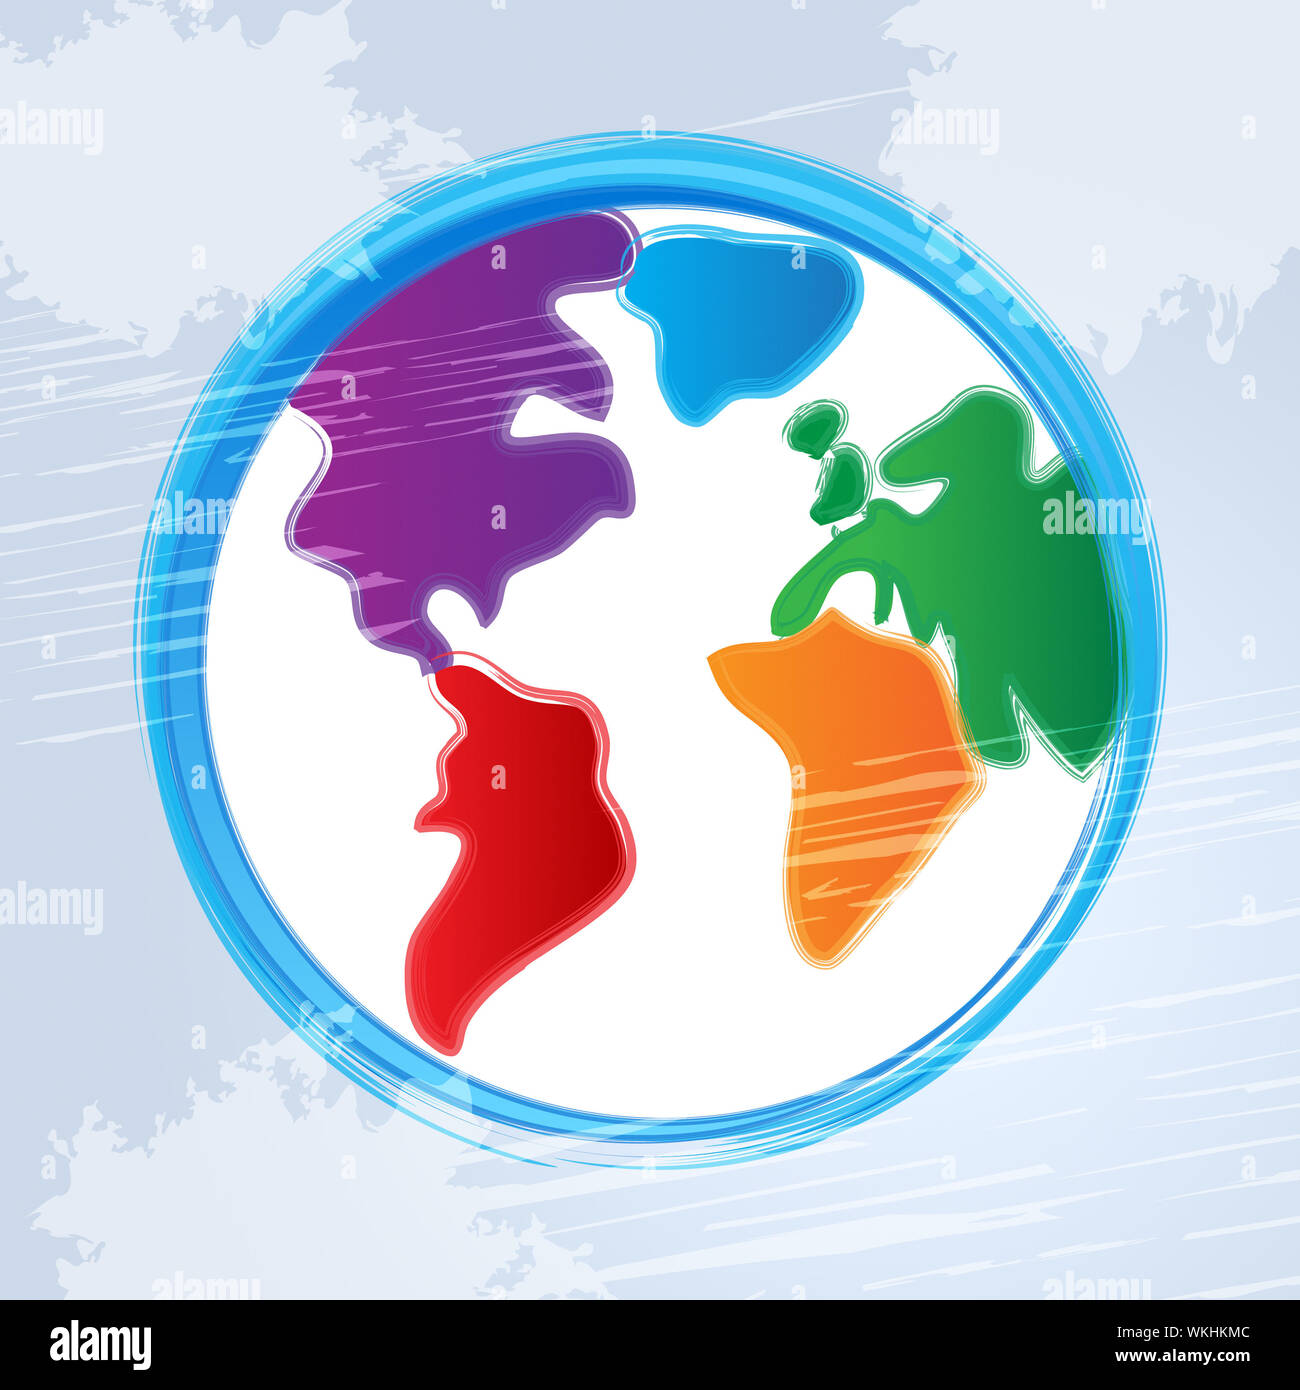 Background Globe Showing Template Globally And Globalization Stock Photo